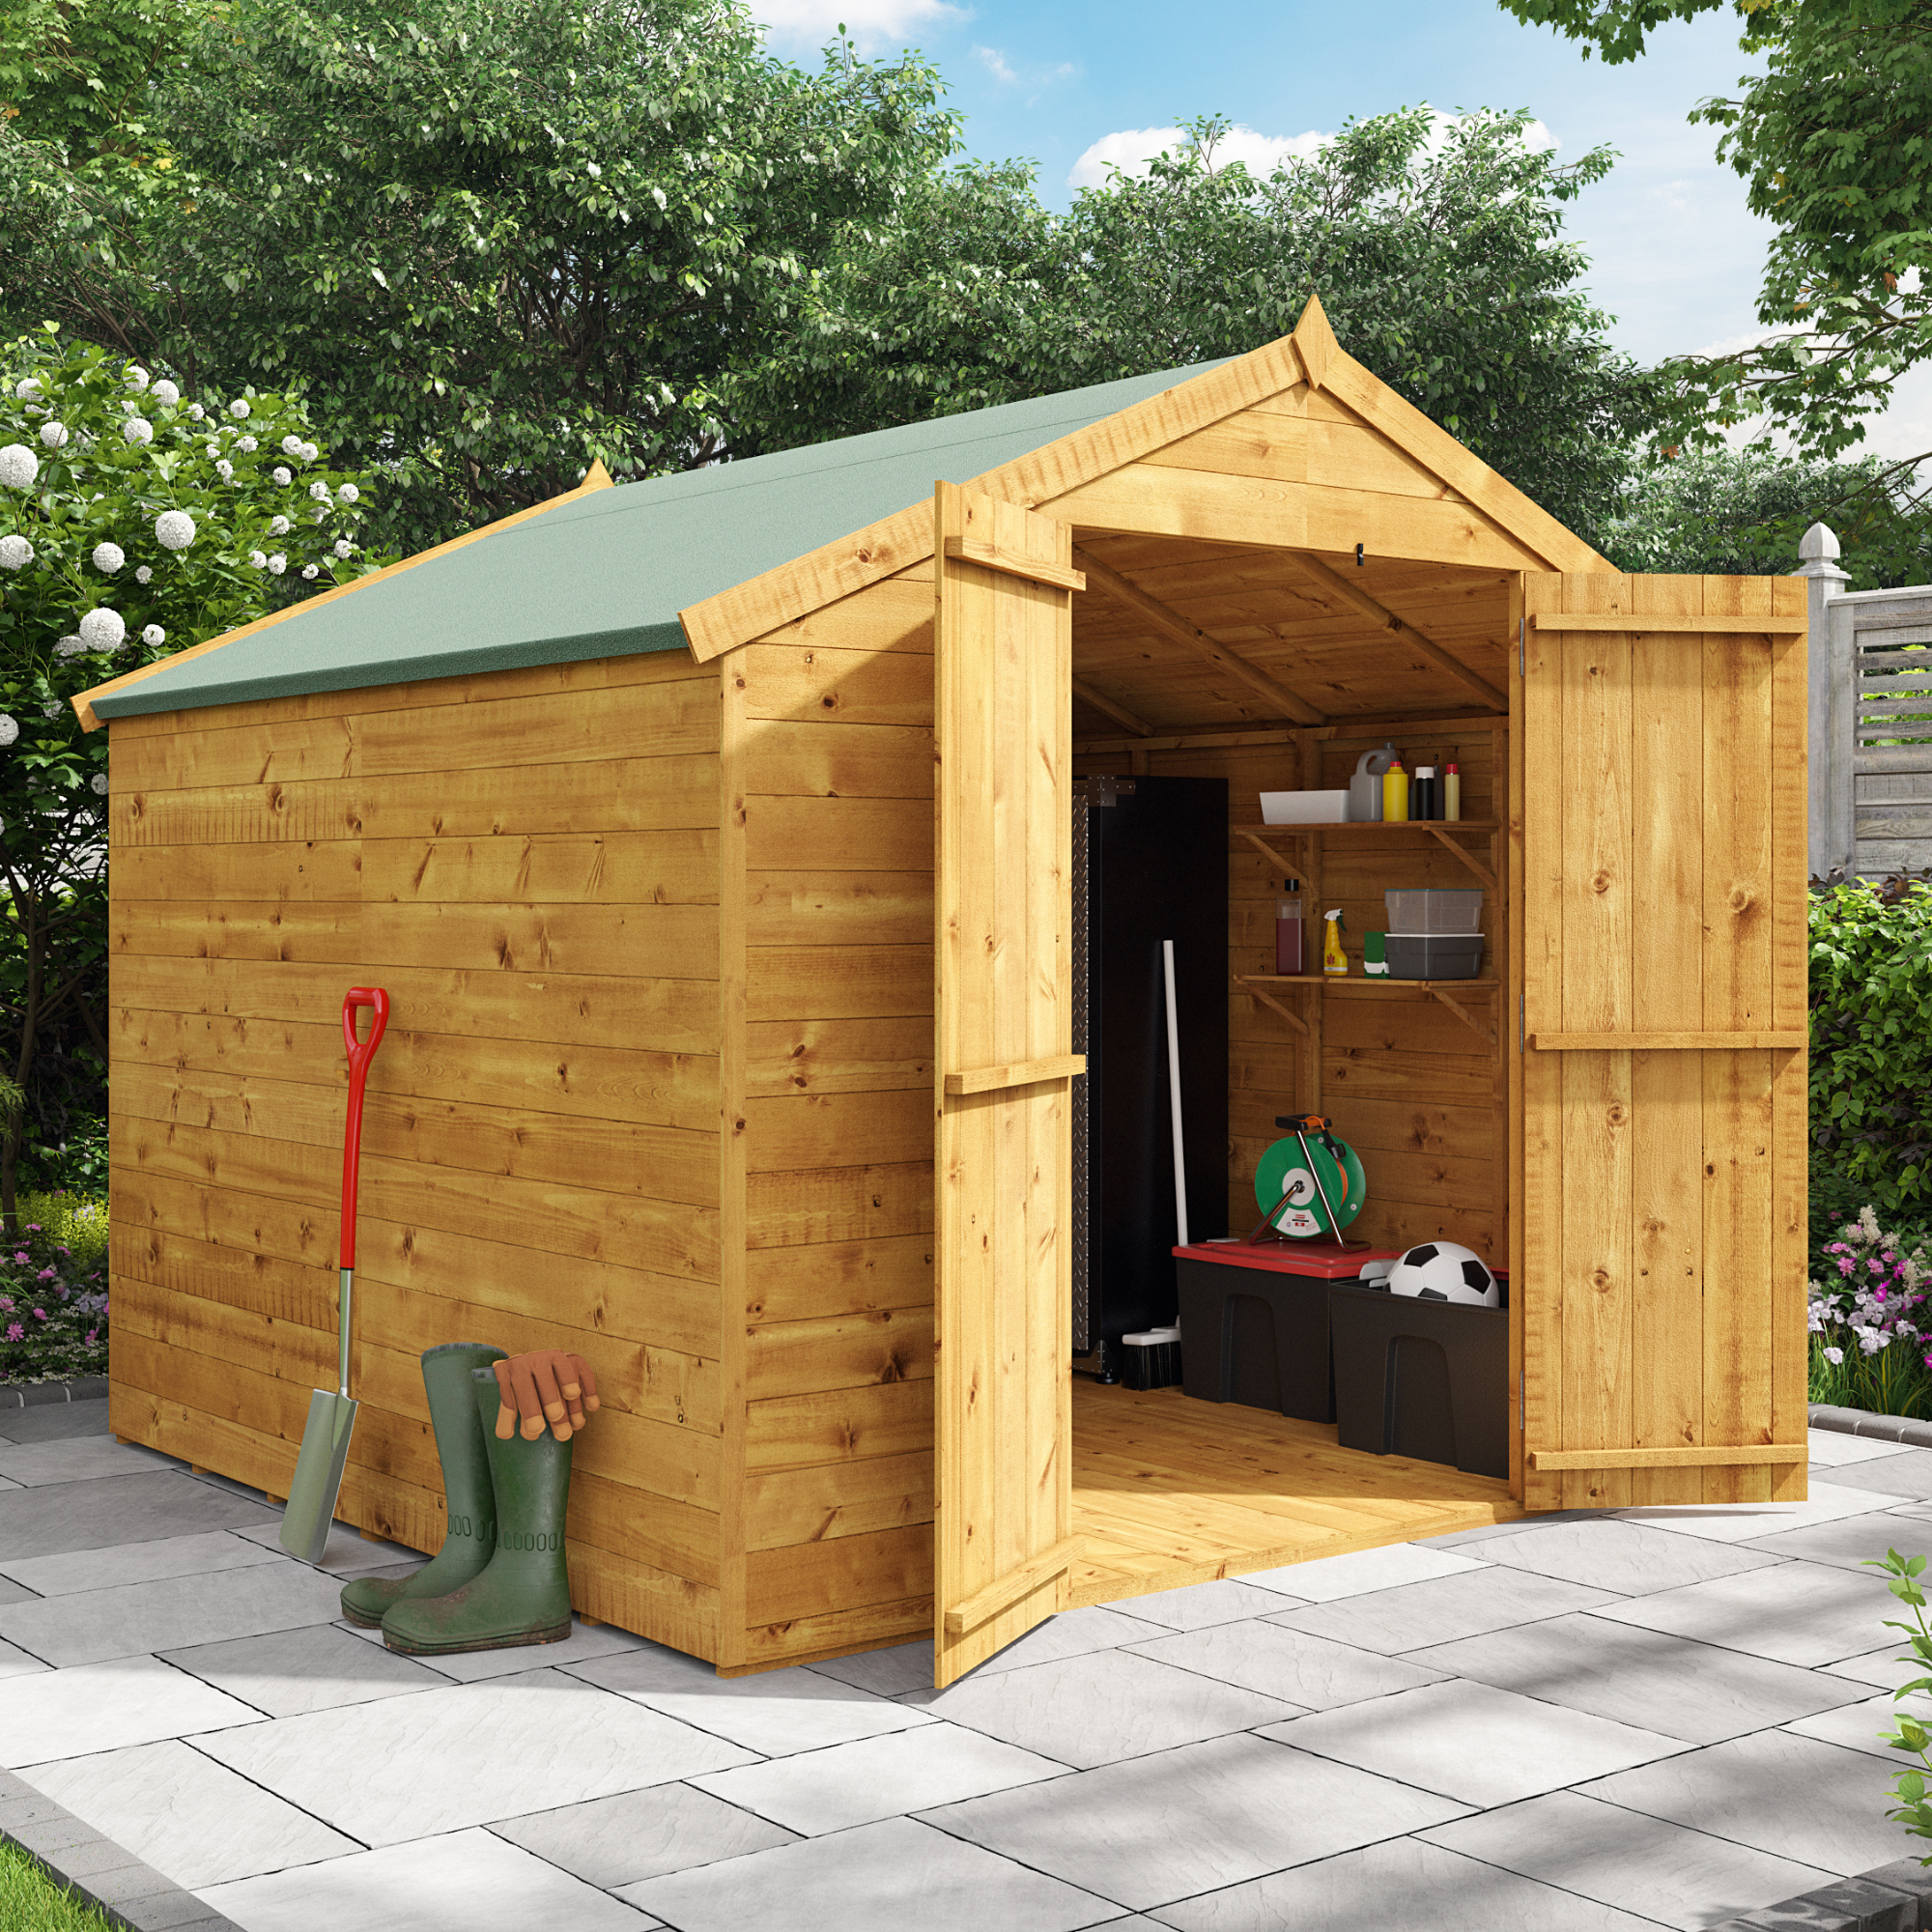 8 x 8 Shed - BillyOh Master Tongue and Groove Wooden Shed - 8x8 Garden Shed - Windowless